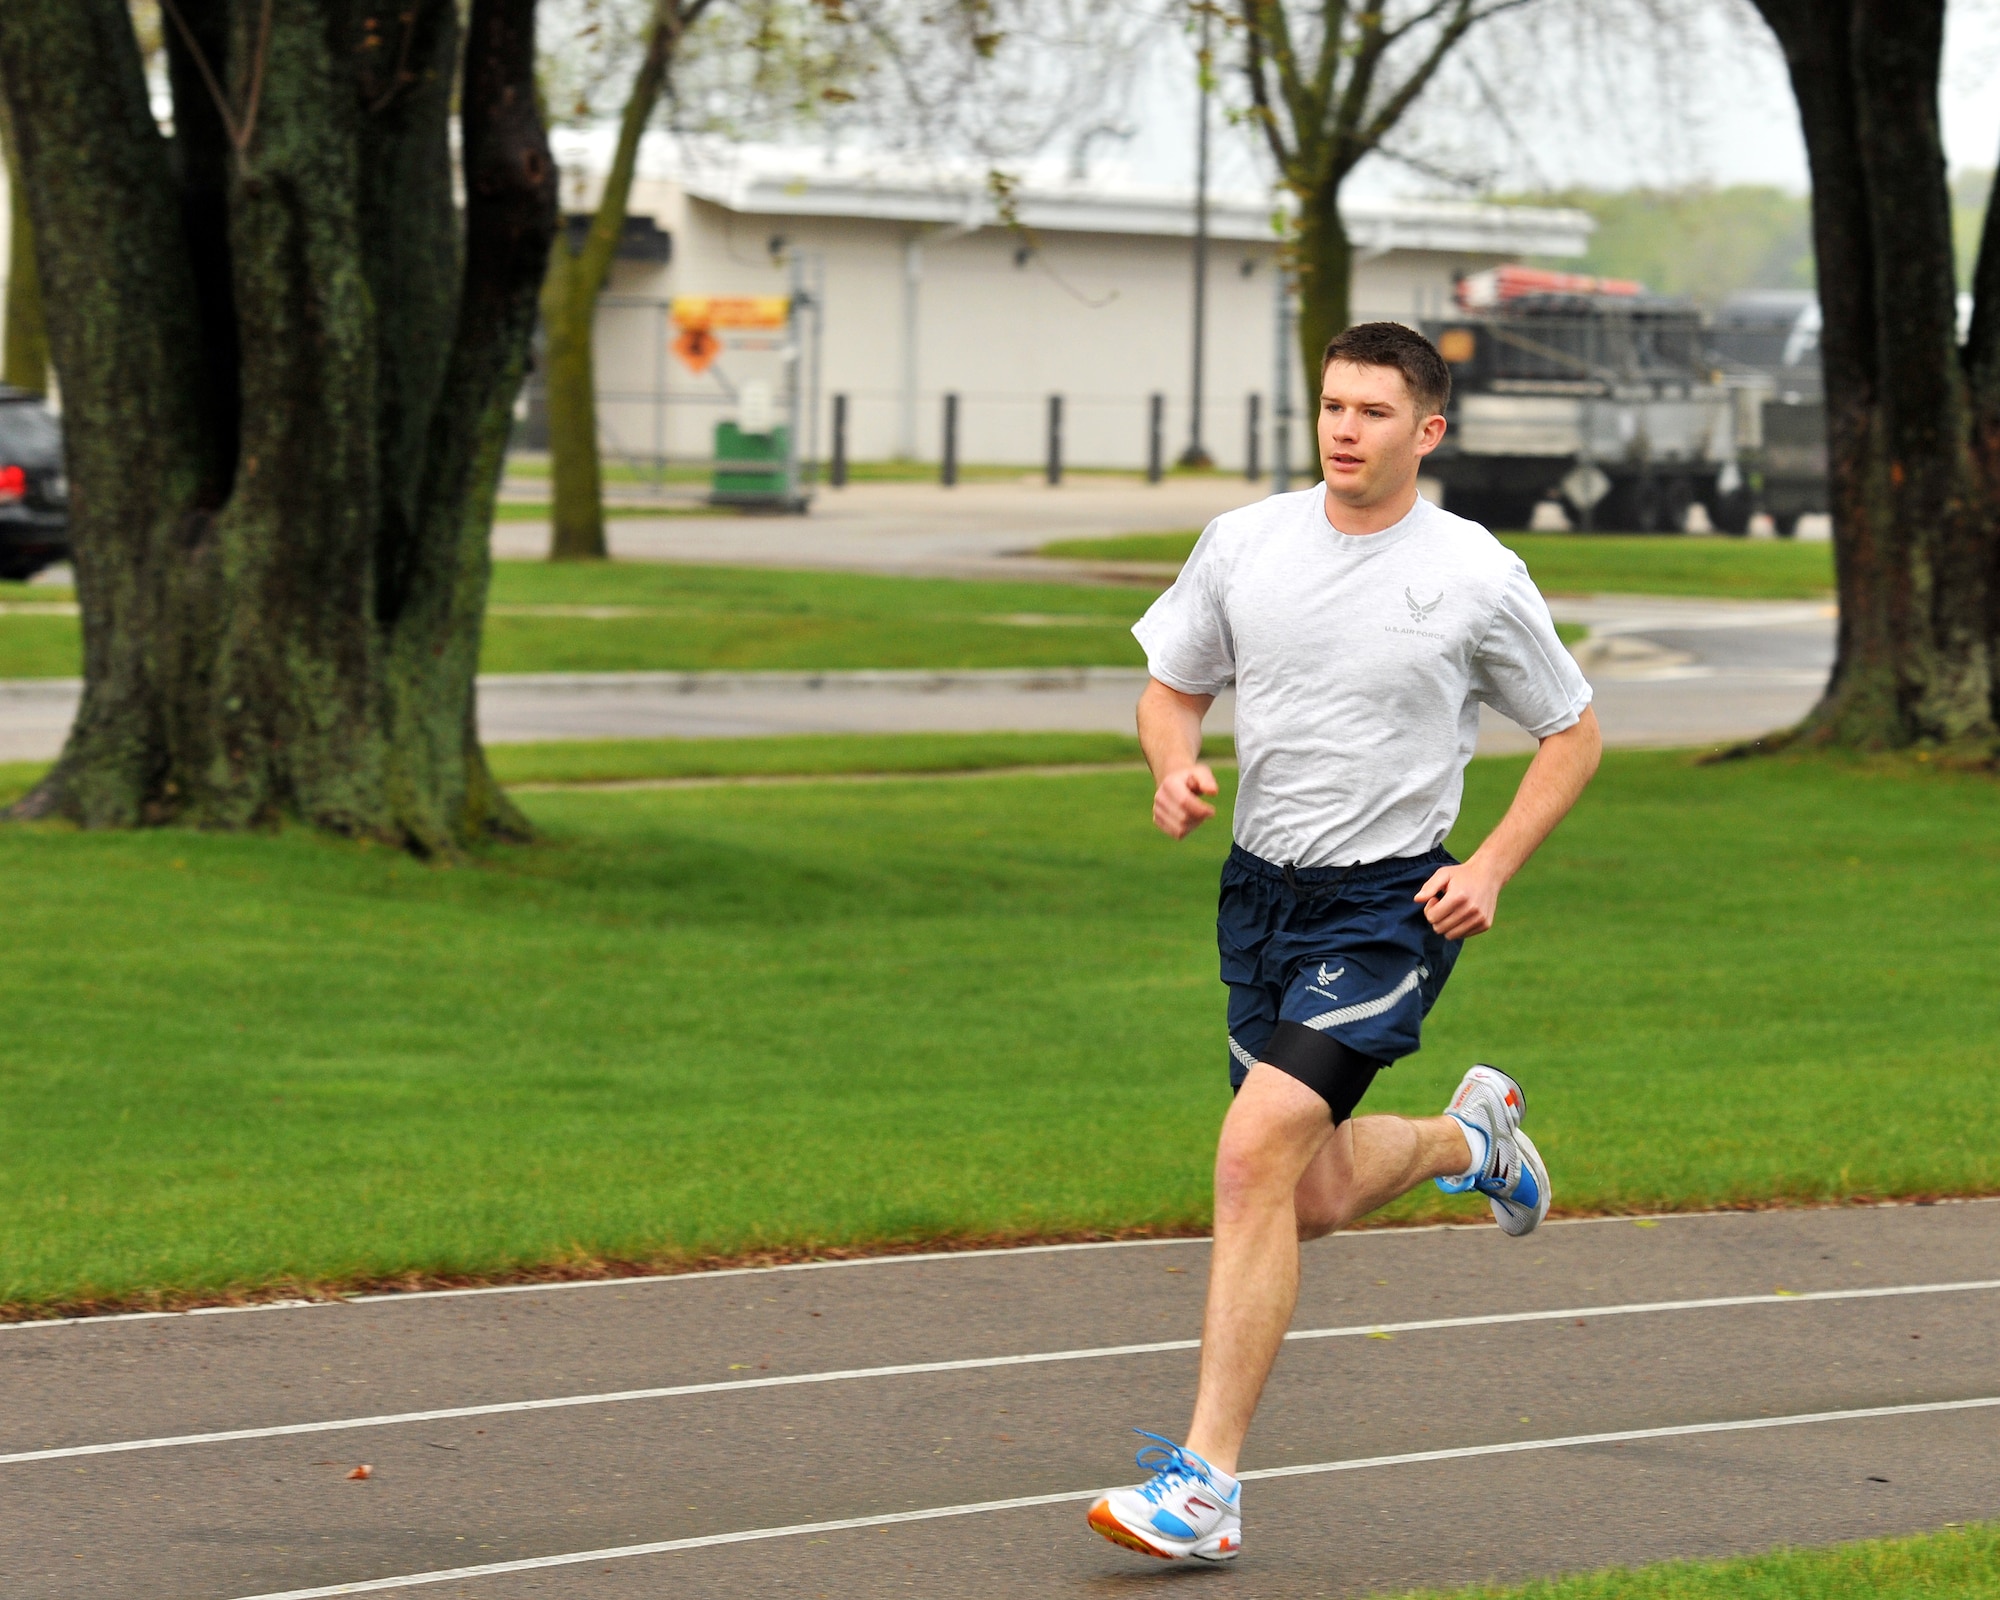 Airman 1st Class Robert Miles, 115th Force Support Squadron, runs on the Truax Field track as part of his annual physical fitness assessment April 15. Miles finished with a time of 7:59 which put him in the "Excellent" category with a perfect overall scoree of 100. Miles is also training for the National Guard Marathon in Lincoln, Neb., for a chance to make the National Guard Marathon Team which travels around the country to compete. Wisconsin Air National Guard photo by Tech. Sgt. Jon LaDue